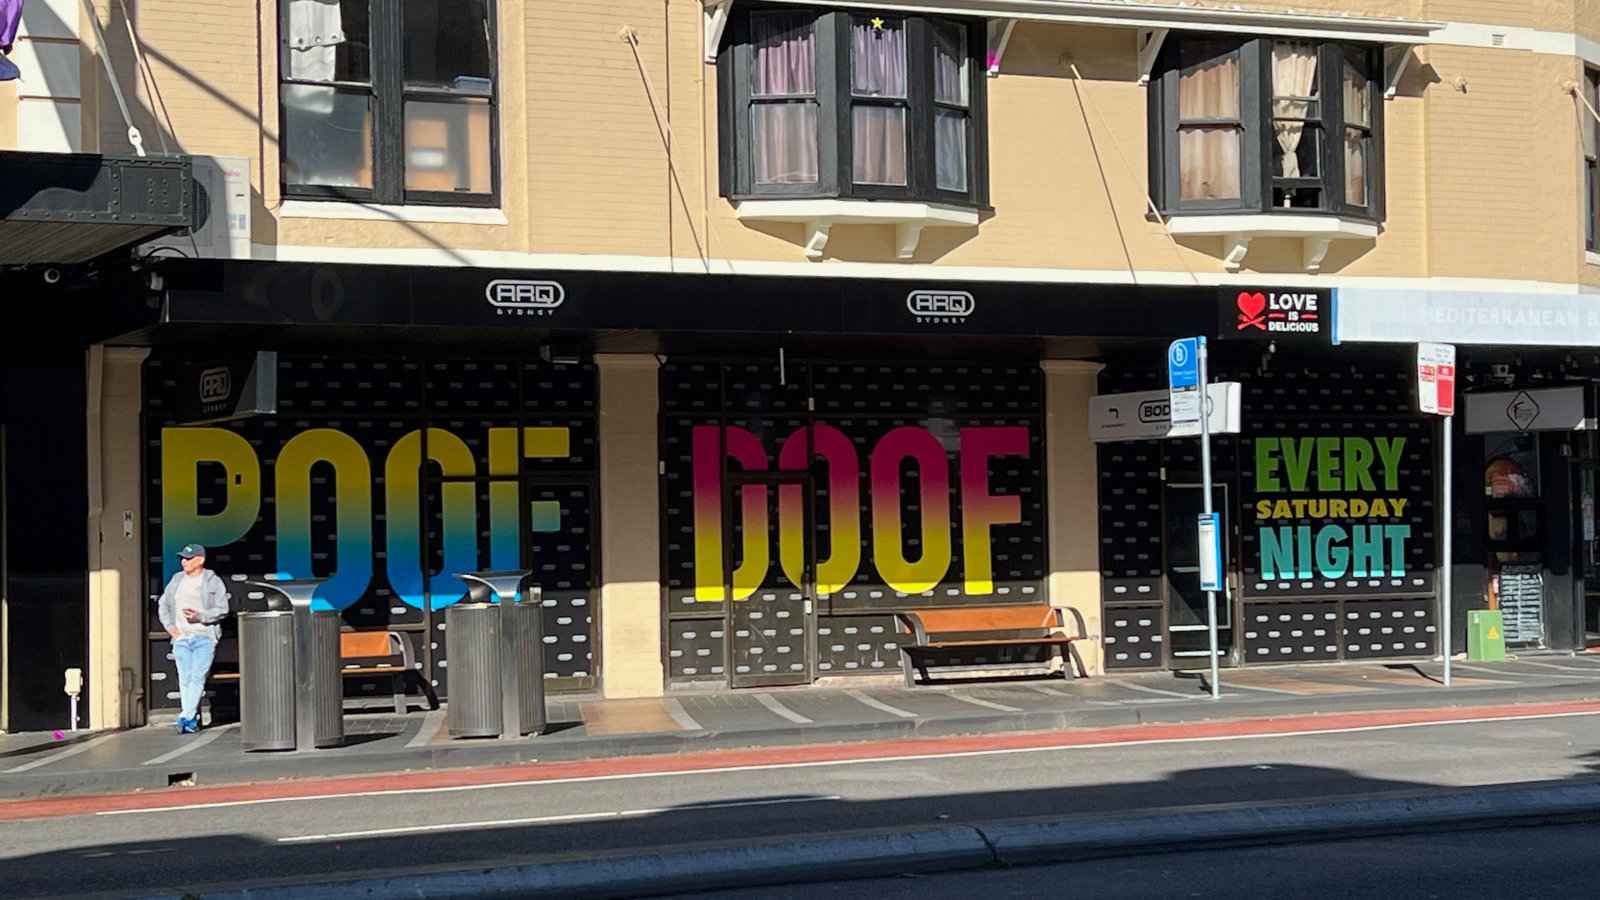 The Arq gay club in Sydney which hosts the Poof Doof party.